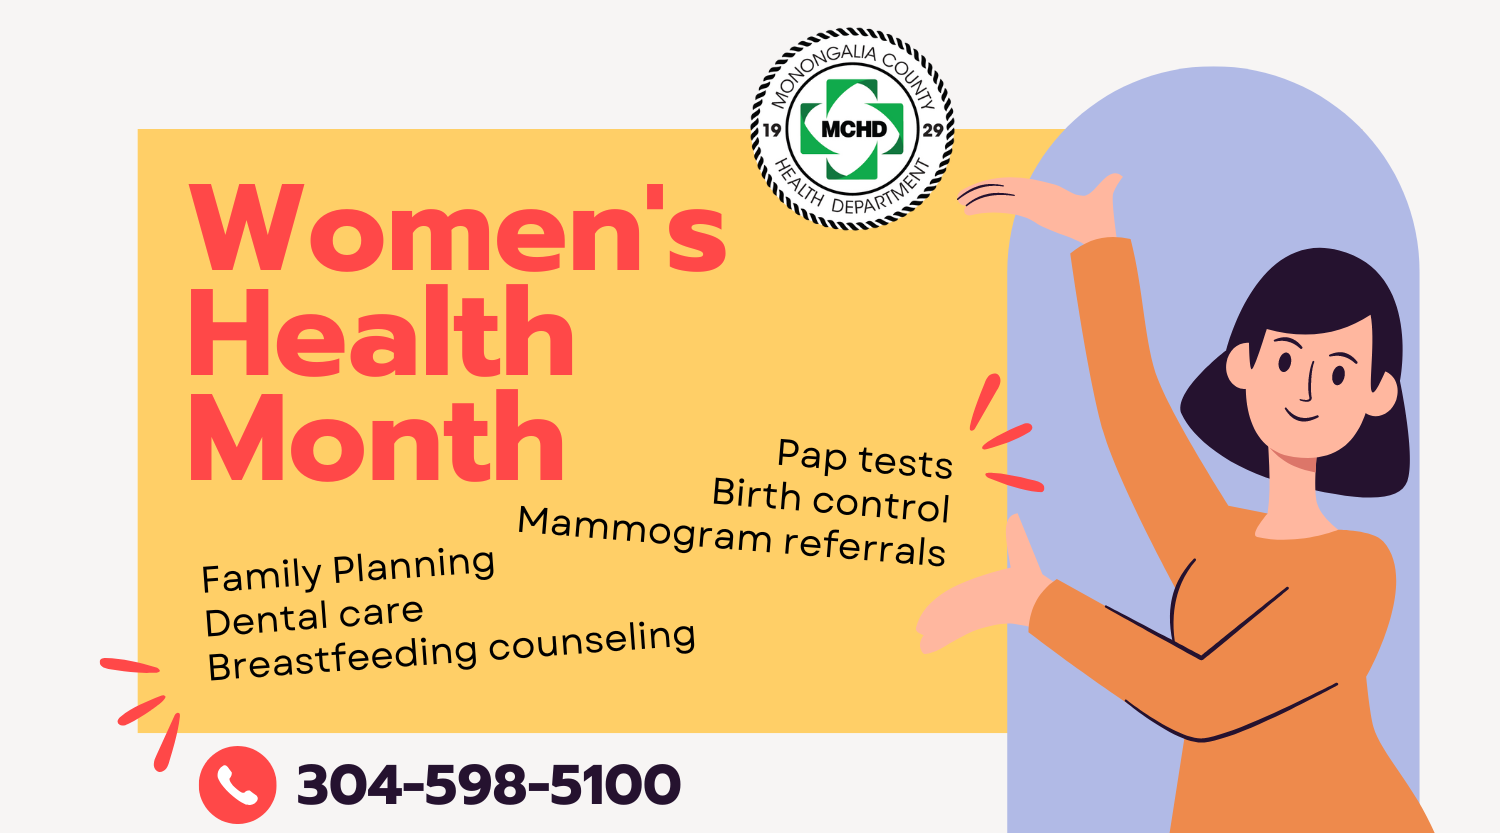 From birth control to breastfeeding, MCHD has you covered